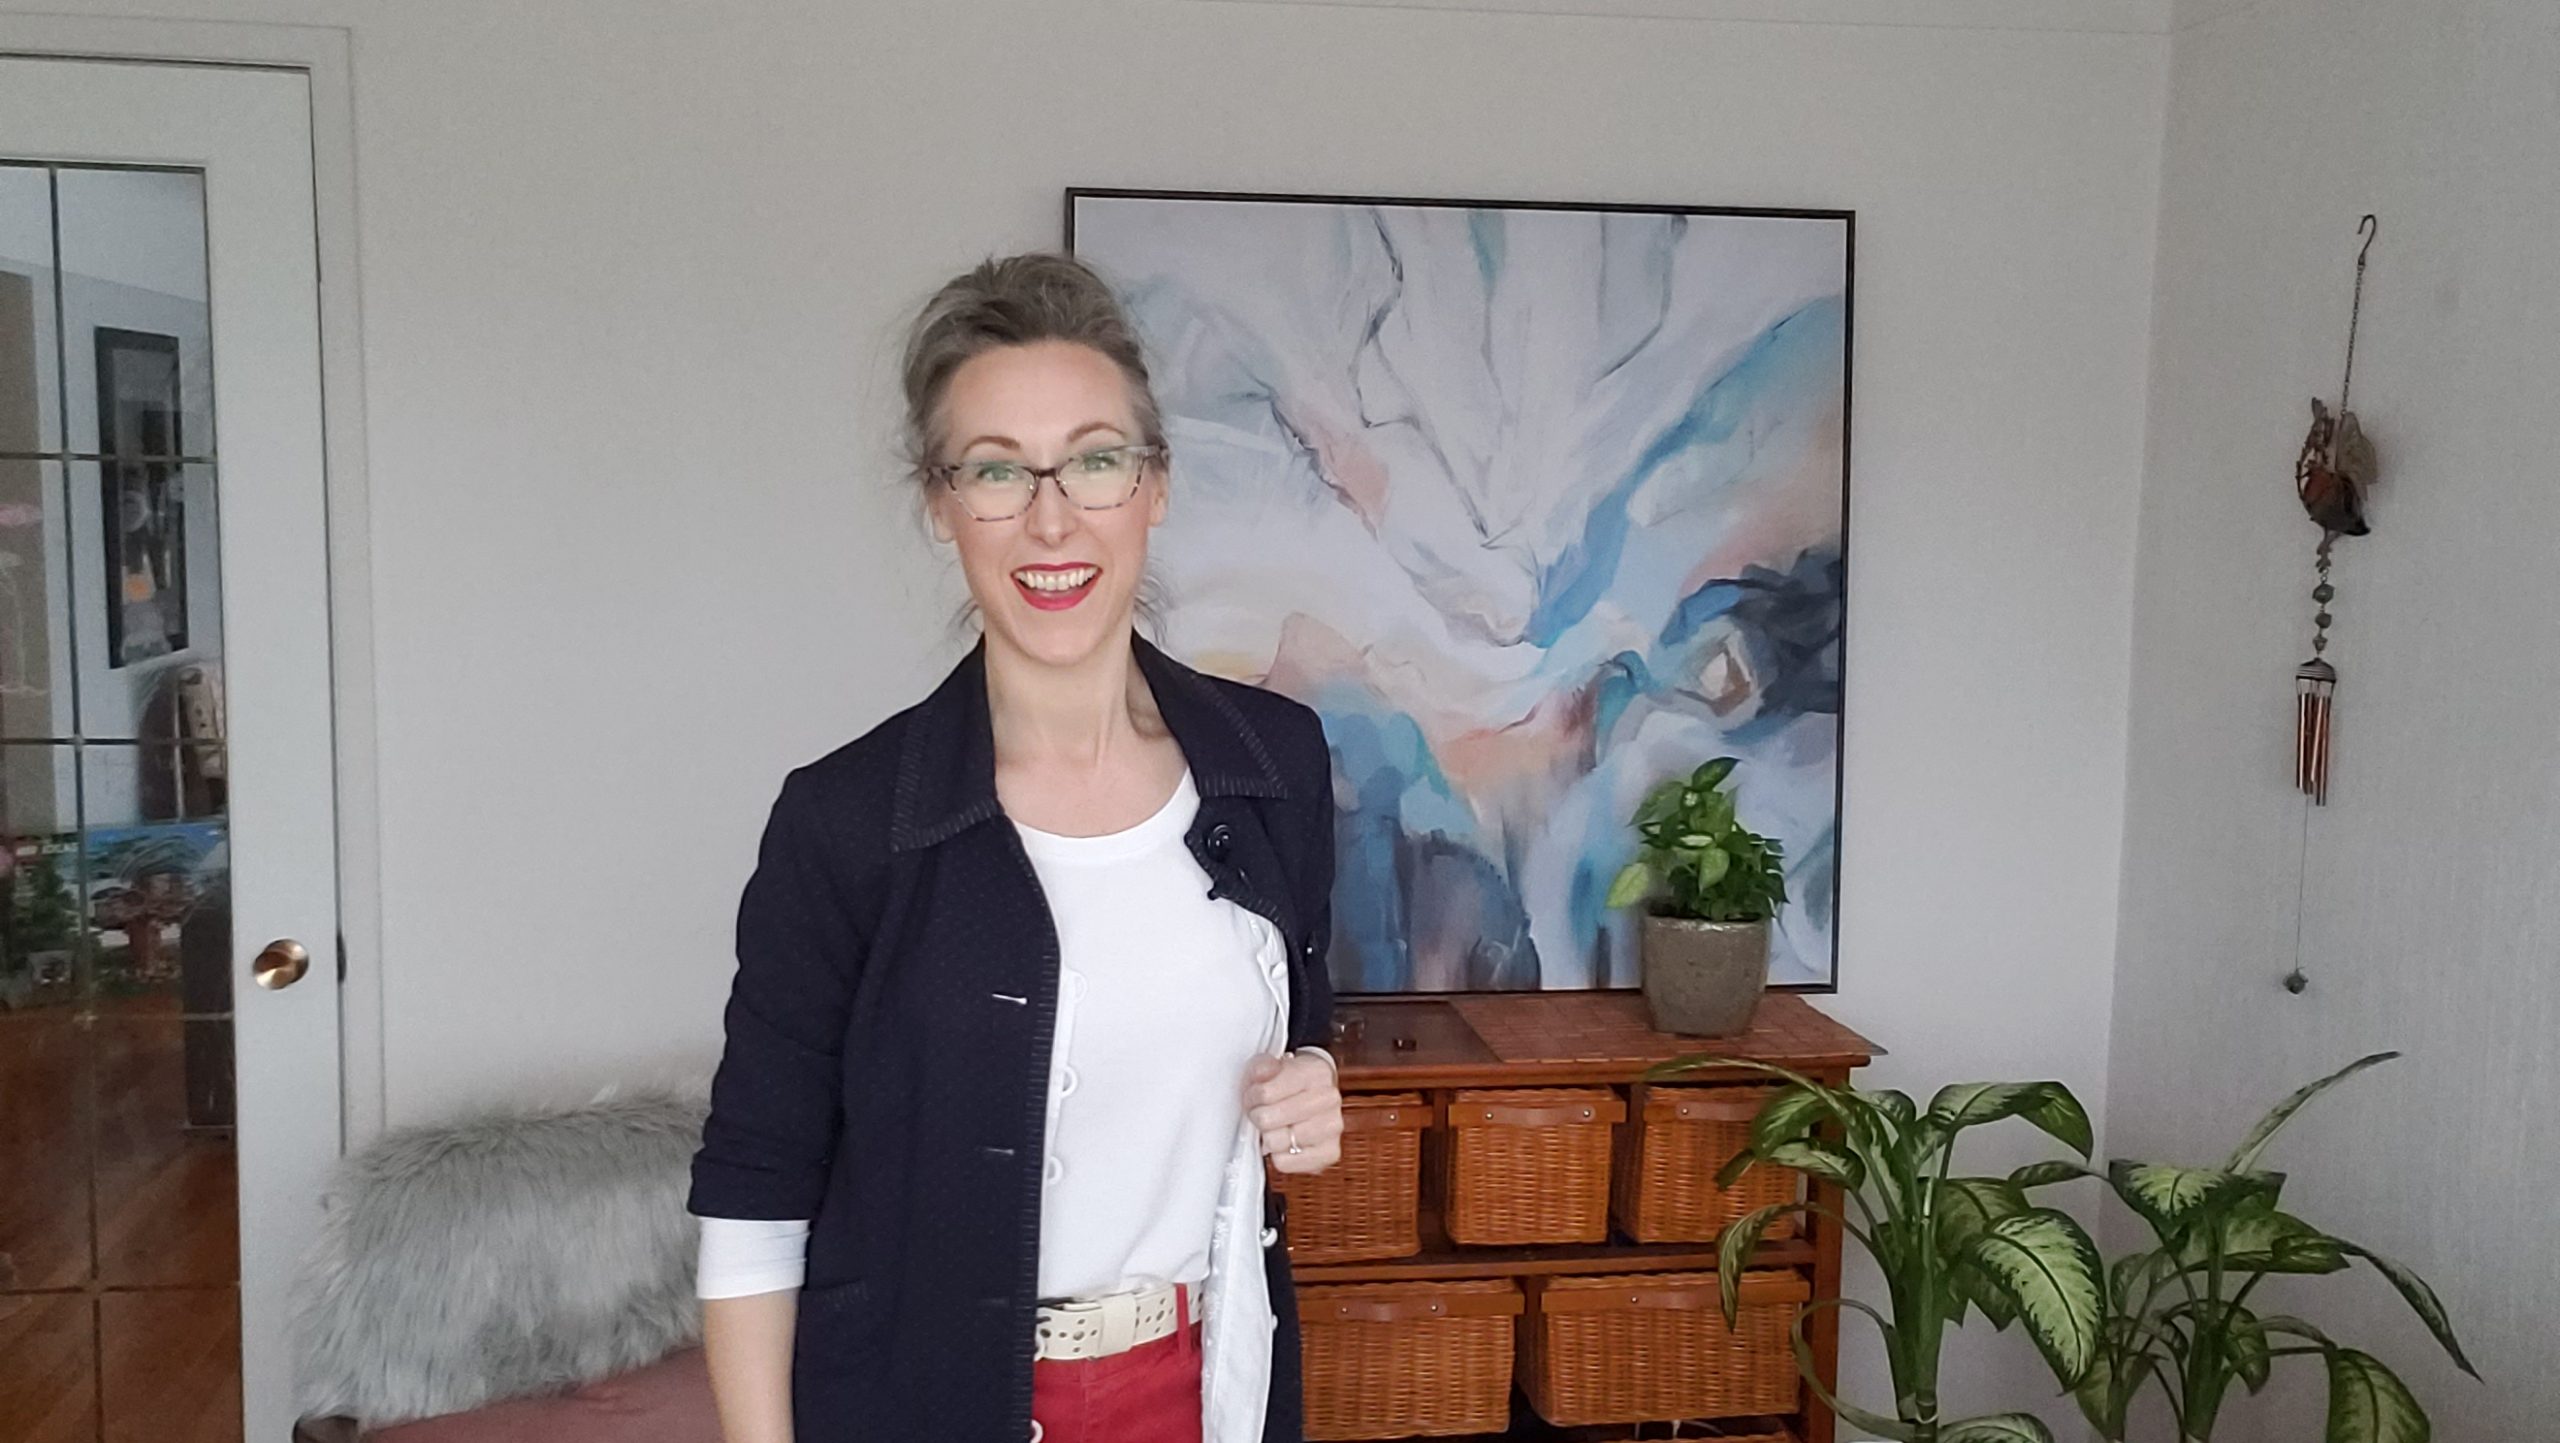 Erin Acton smiles with plants and an abstract painting behind her